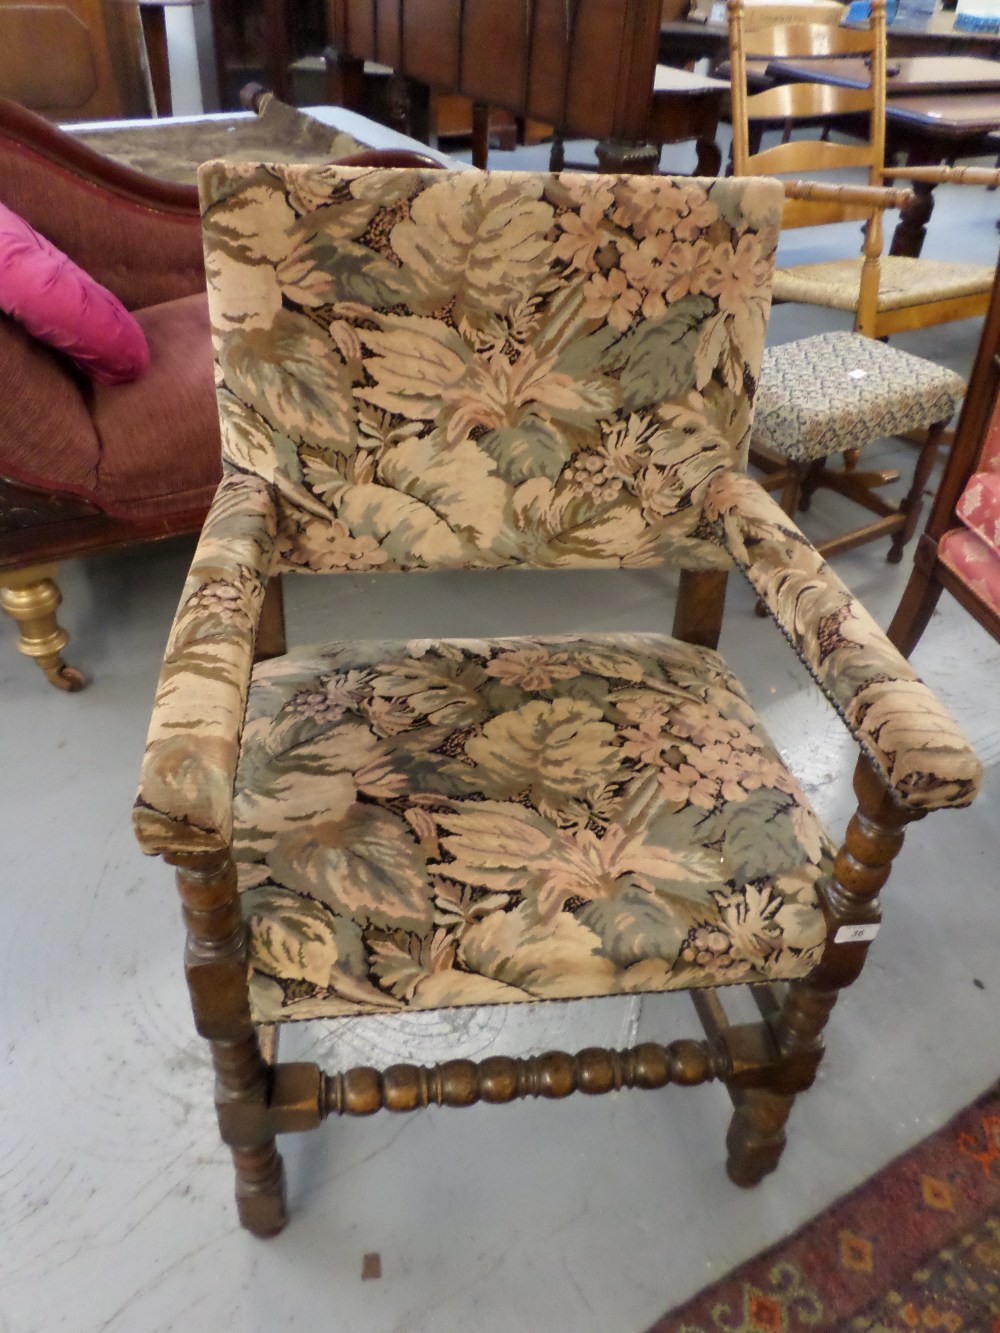 Wooden chair with floral cushion